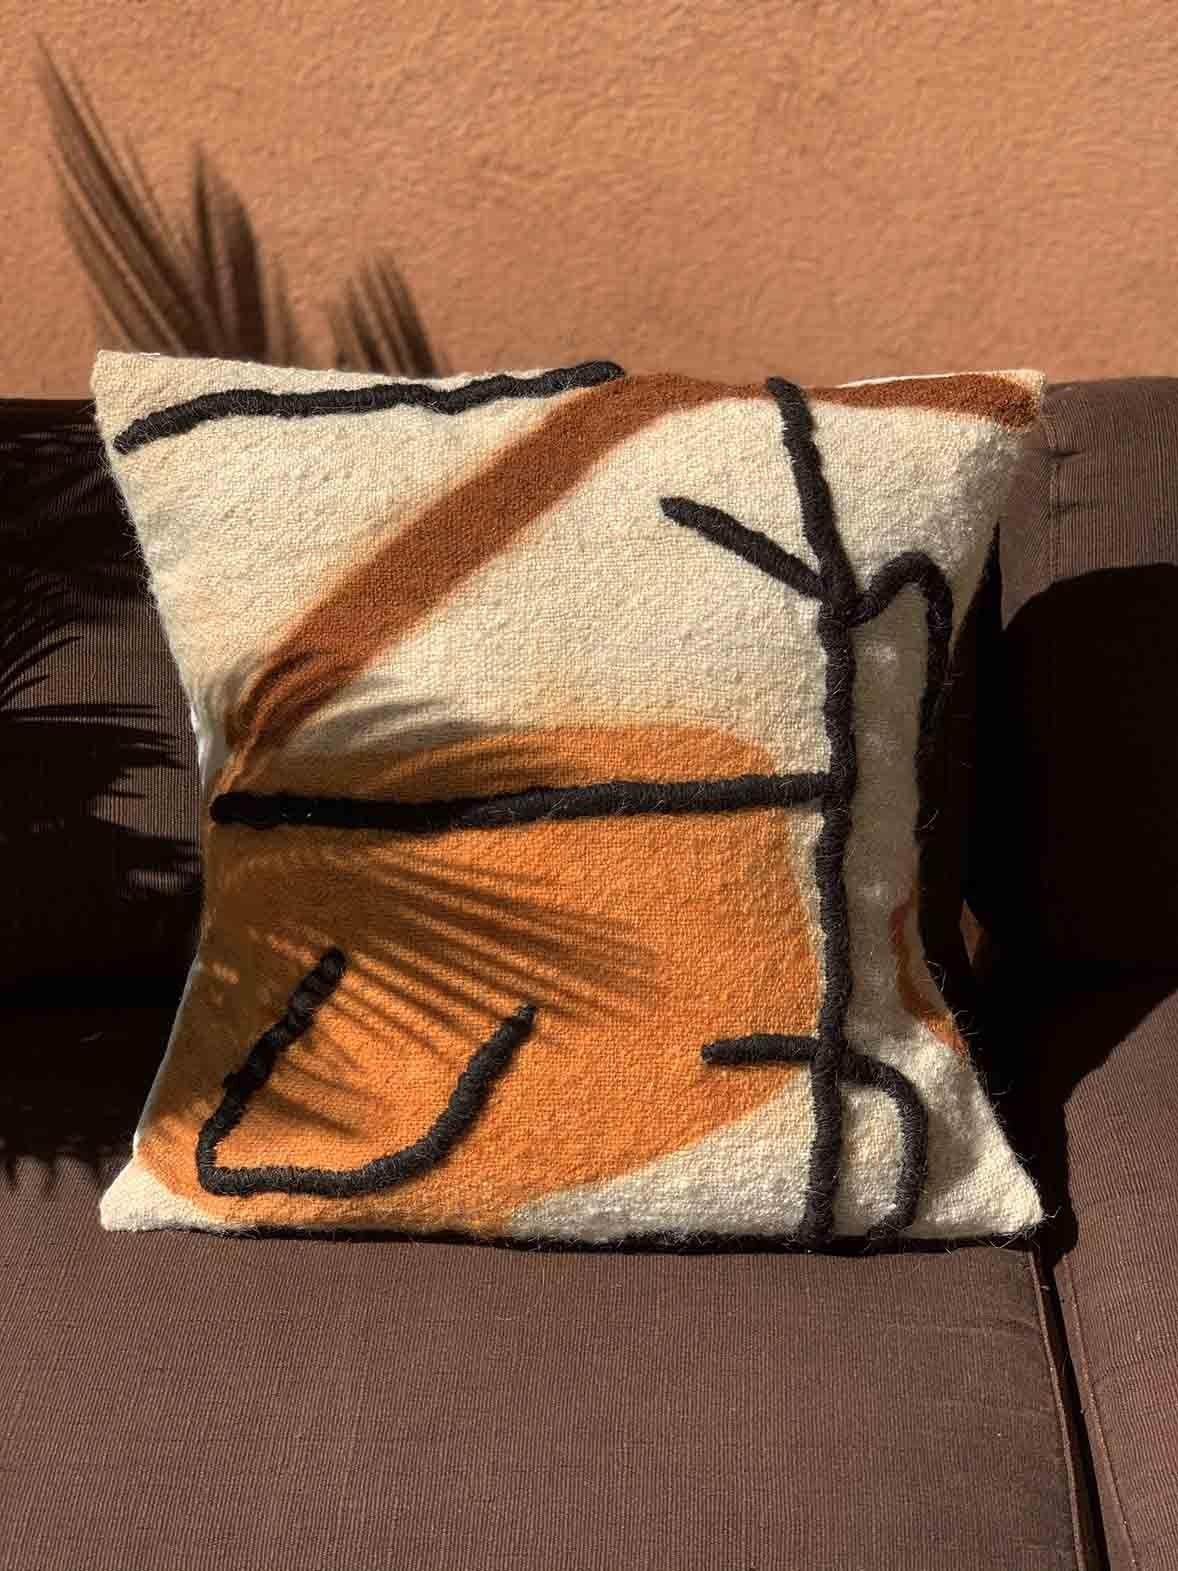 Contemporary Cushion Cover, Made of Wool, Hand-Embroidered, Handpainted with Natural Dyes For Sale